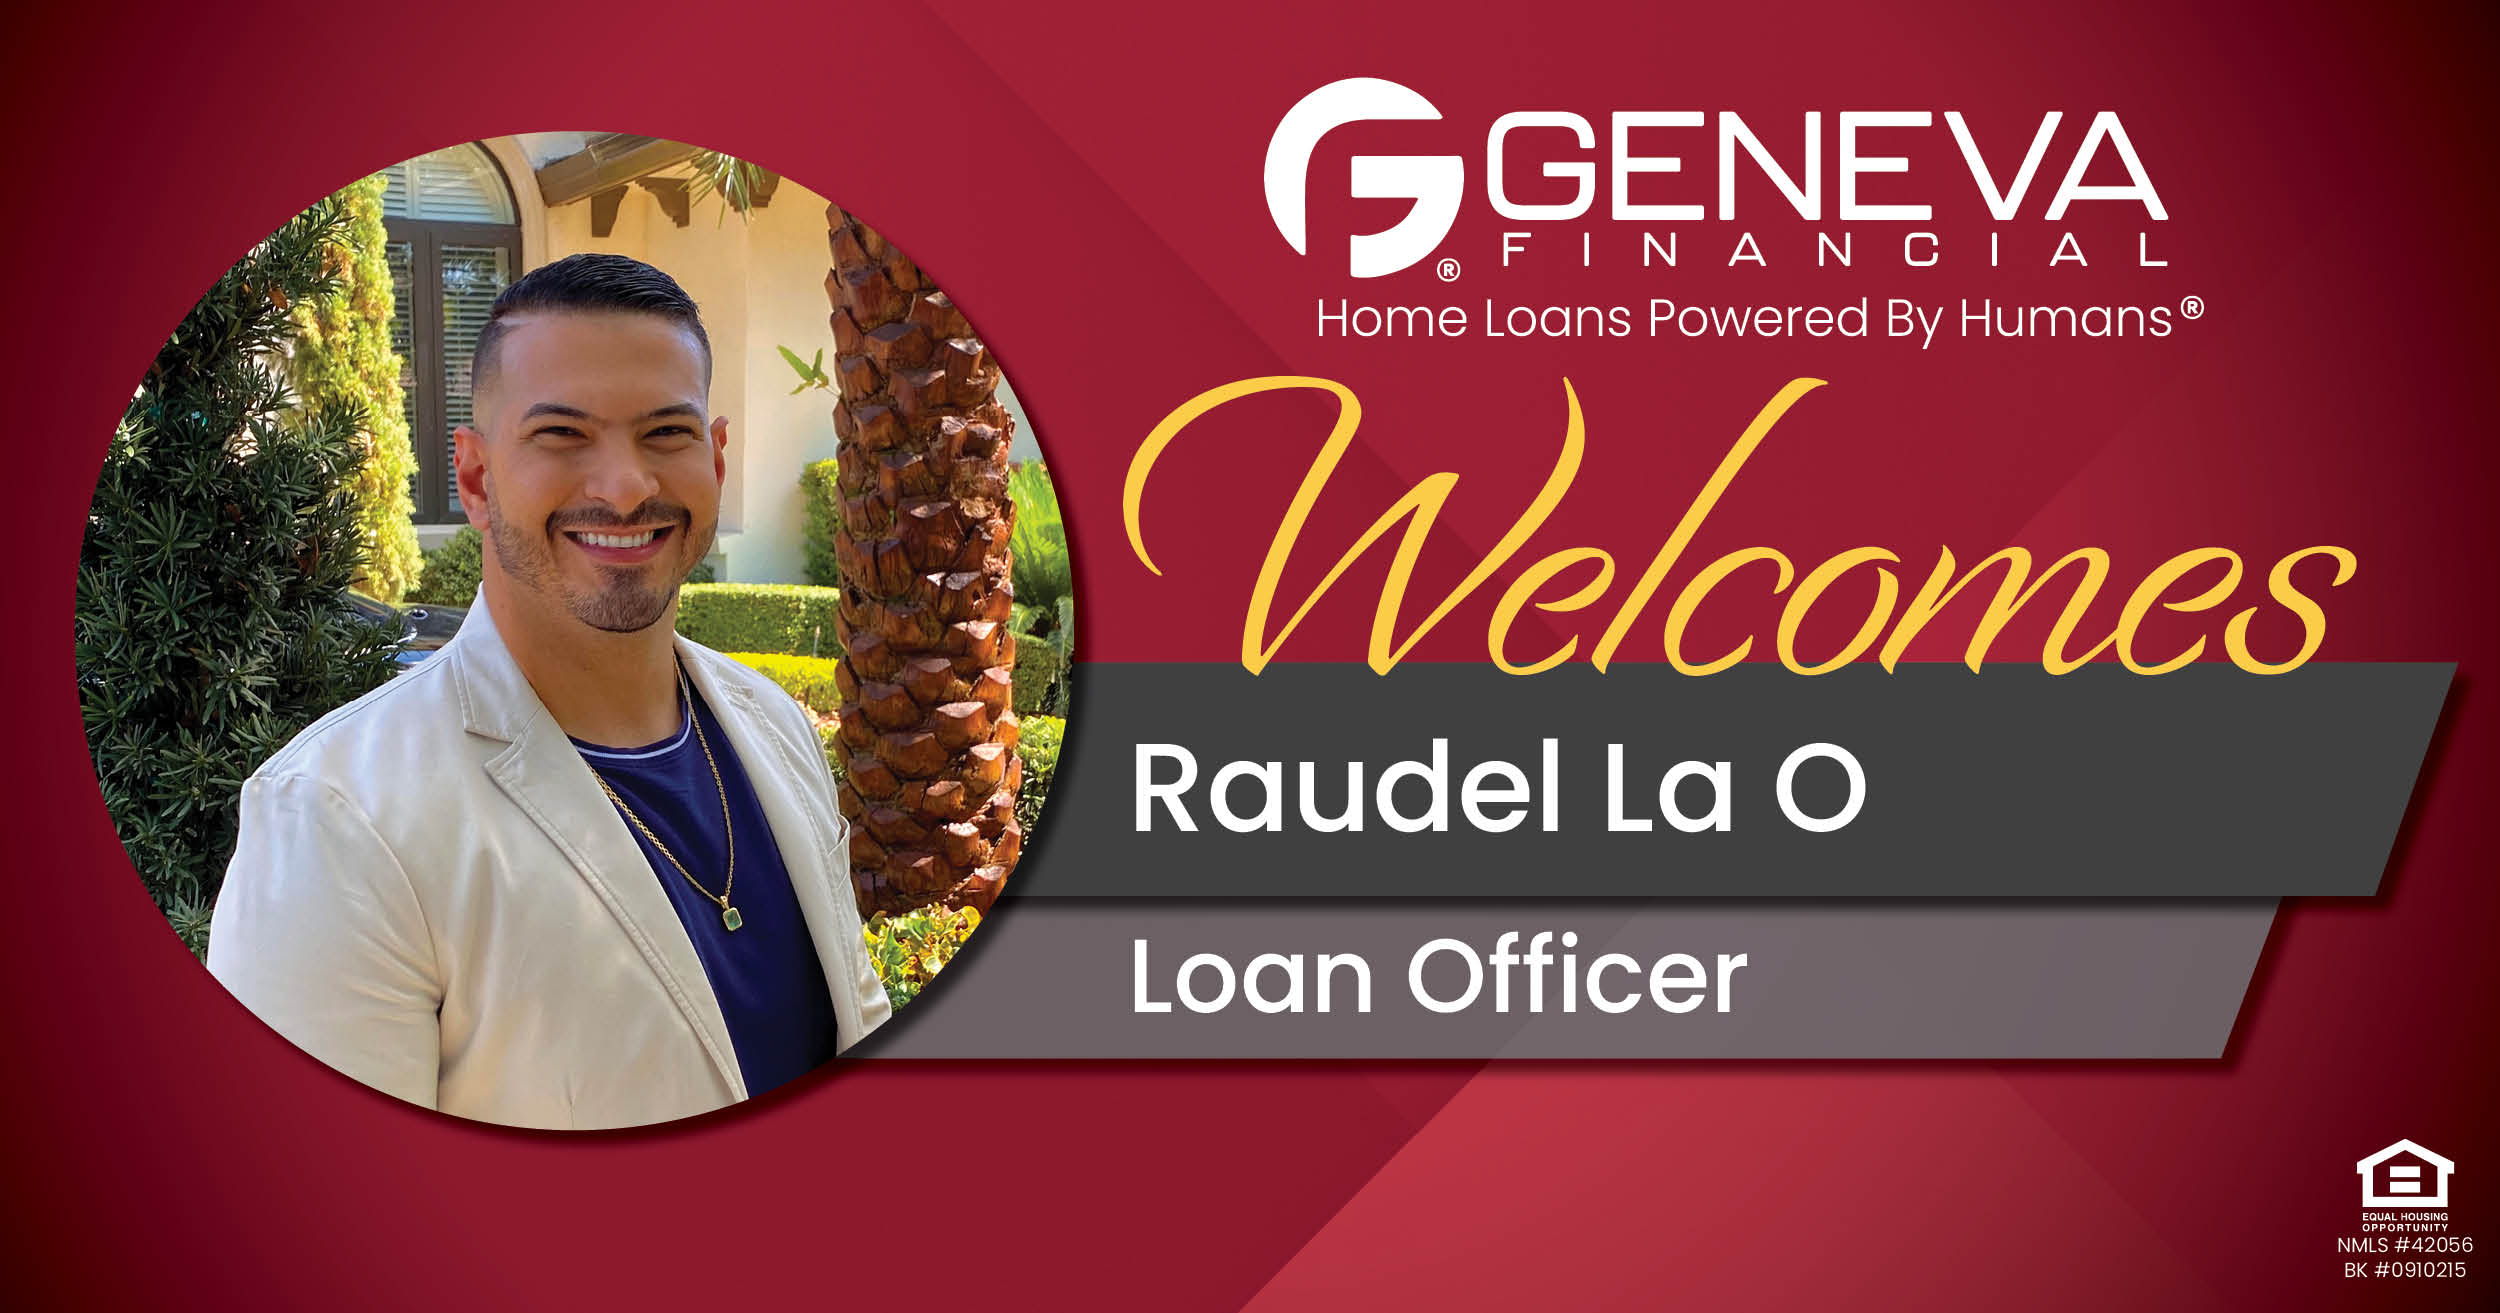 Geneva Financial Welcomes New Loan Officer Raudel La O to Miami, FL – Home Loans Powered by Humans®.